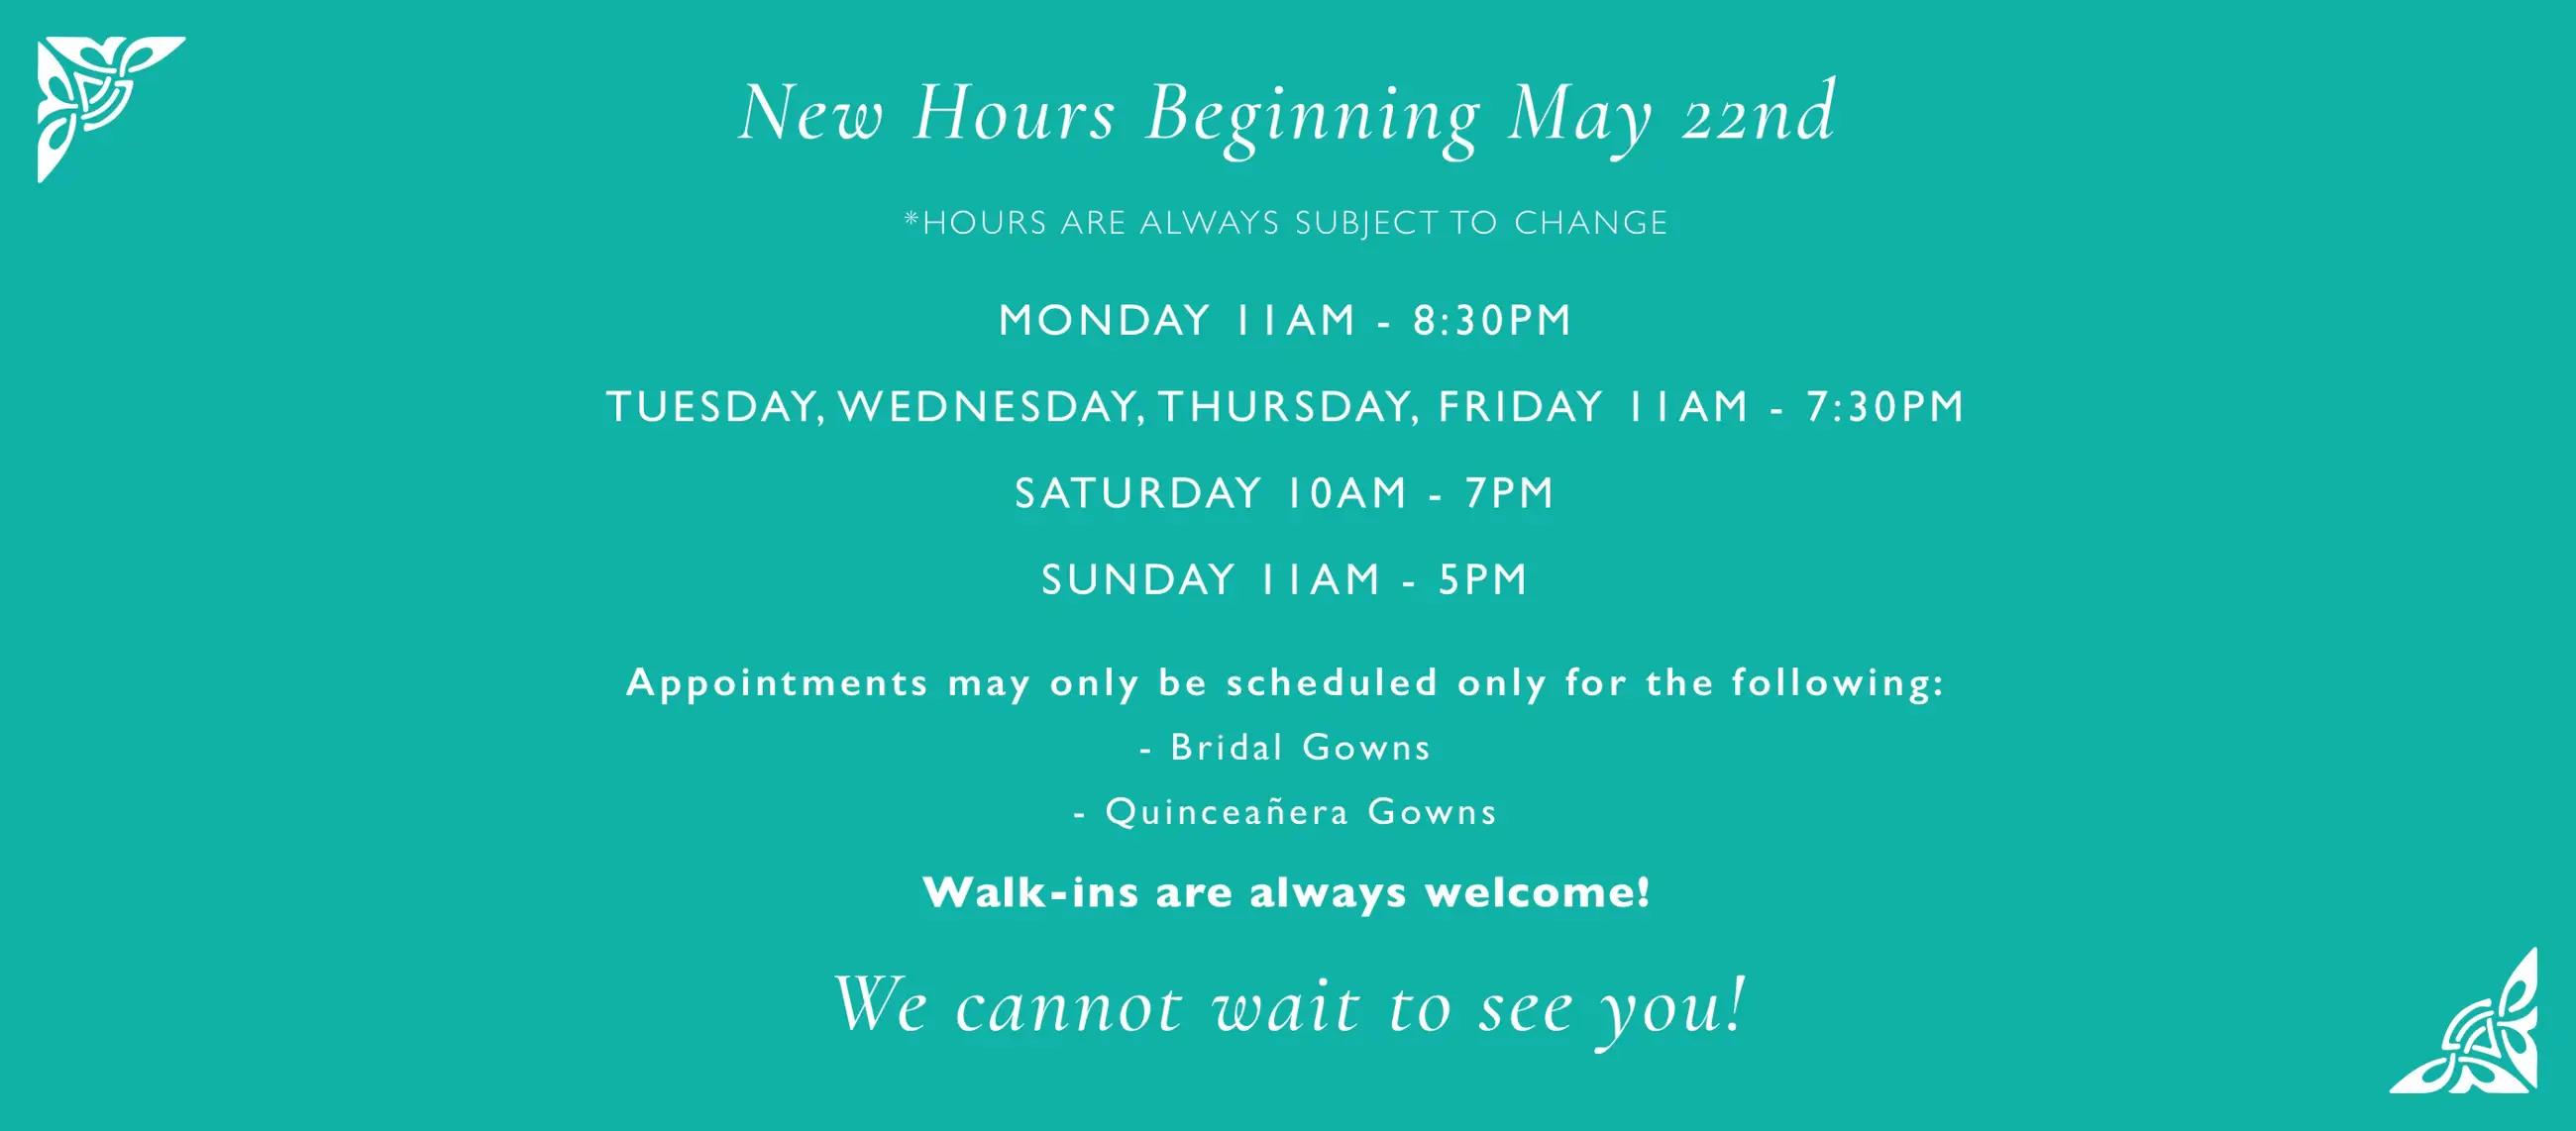 New hours as of may 22nd